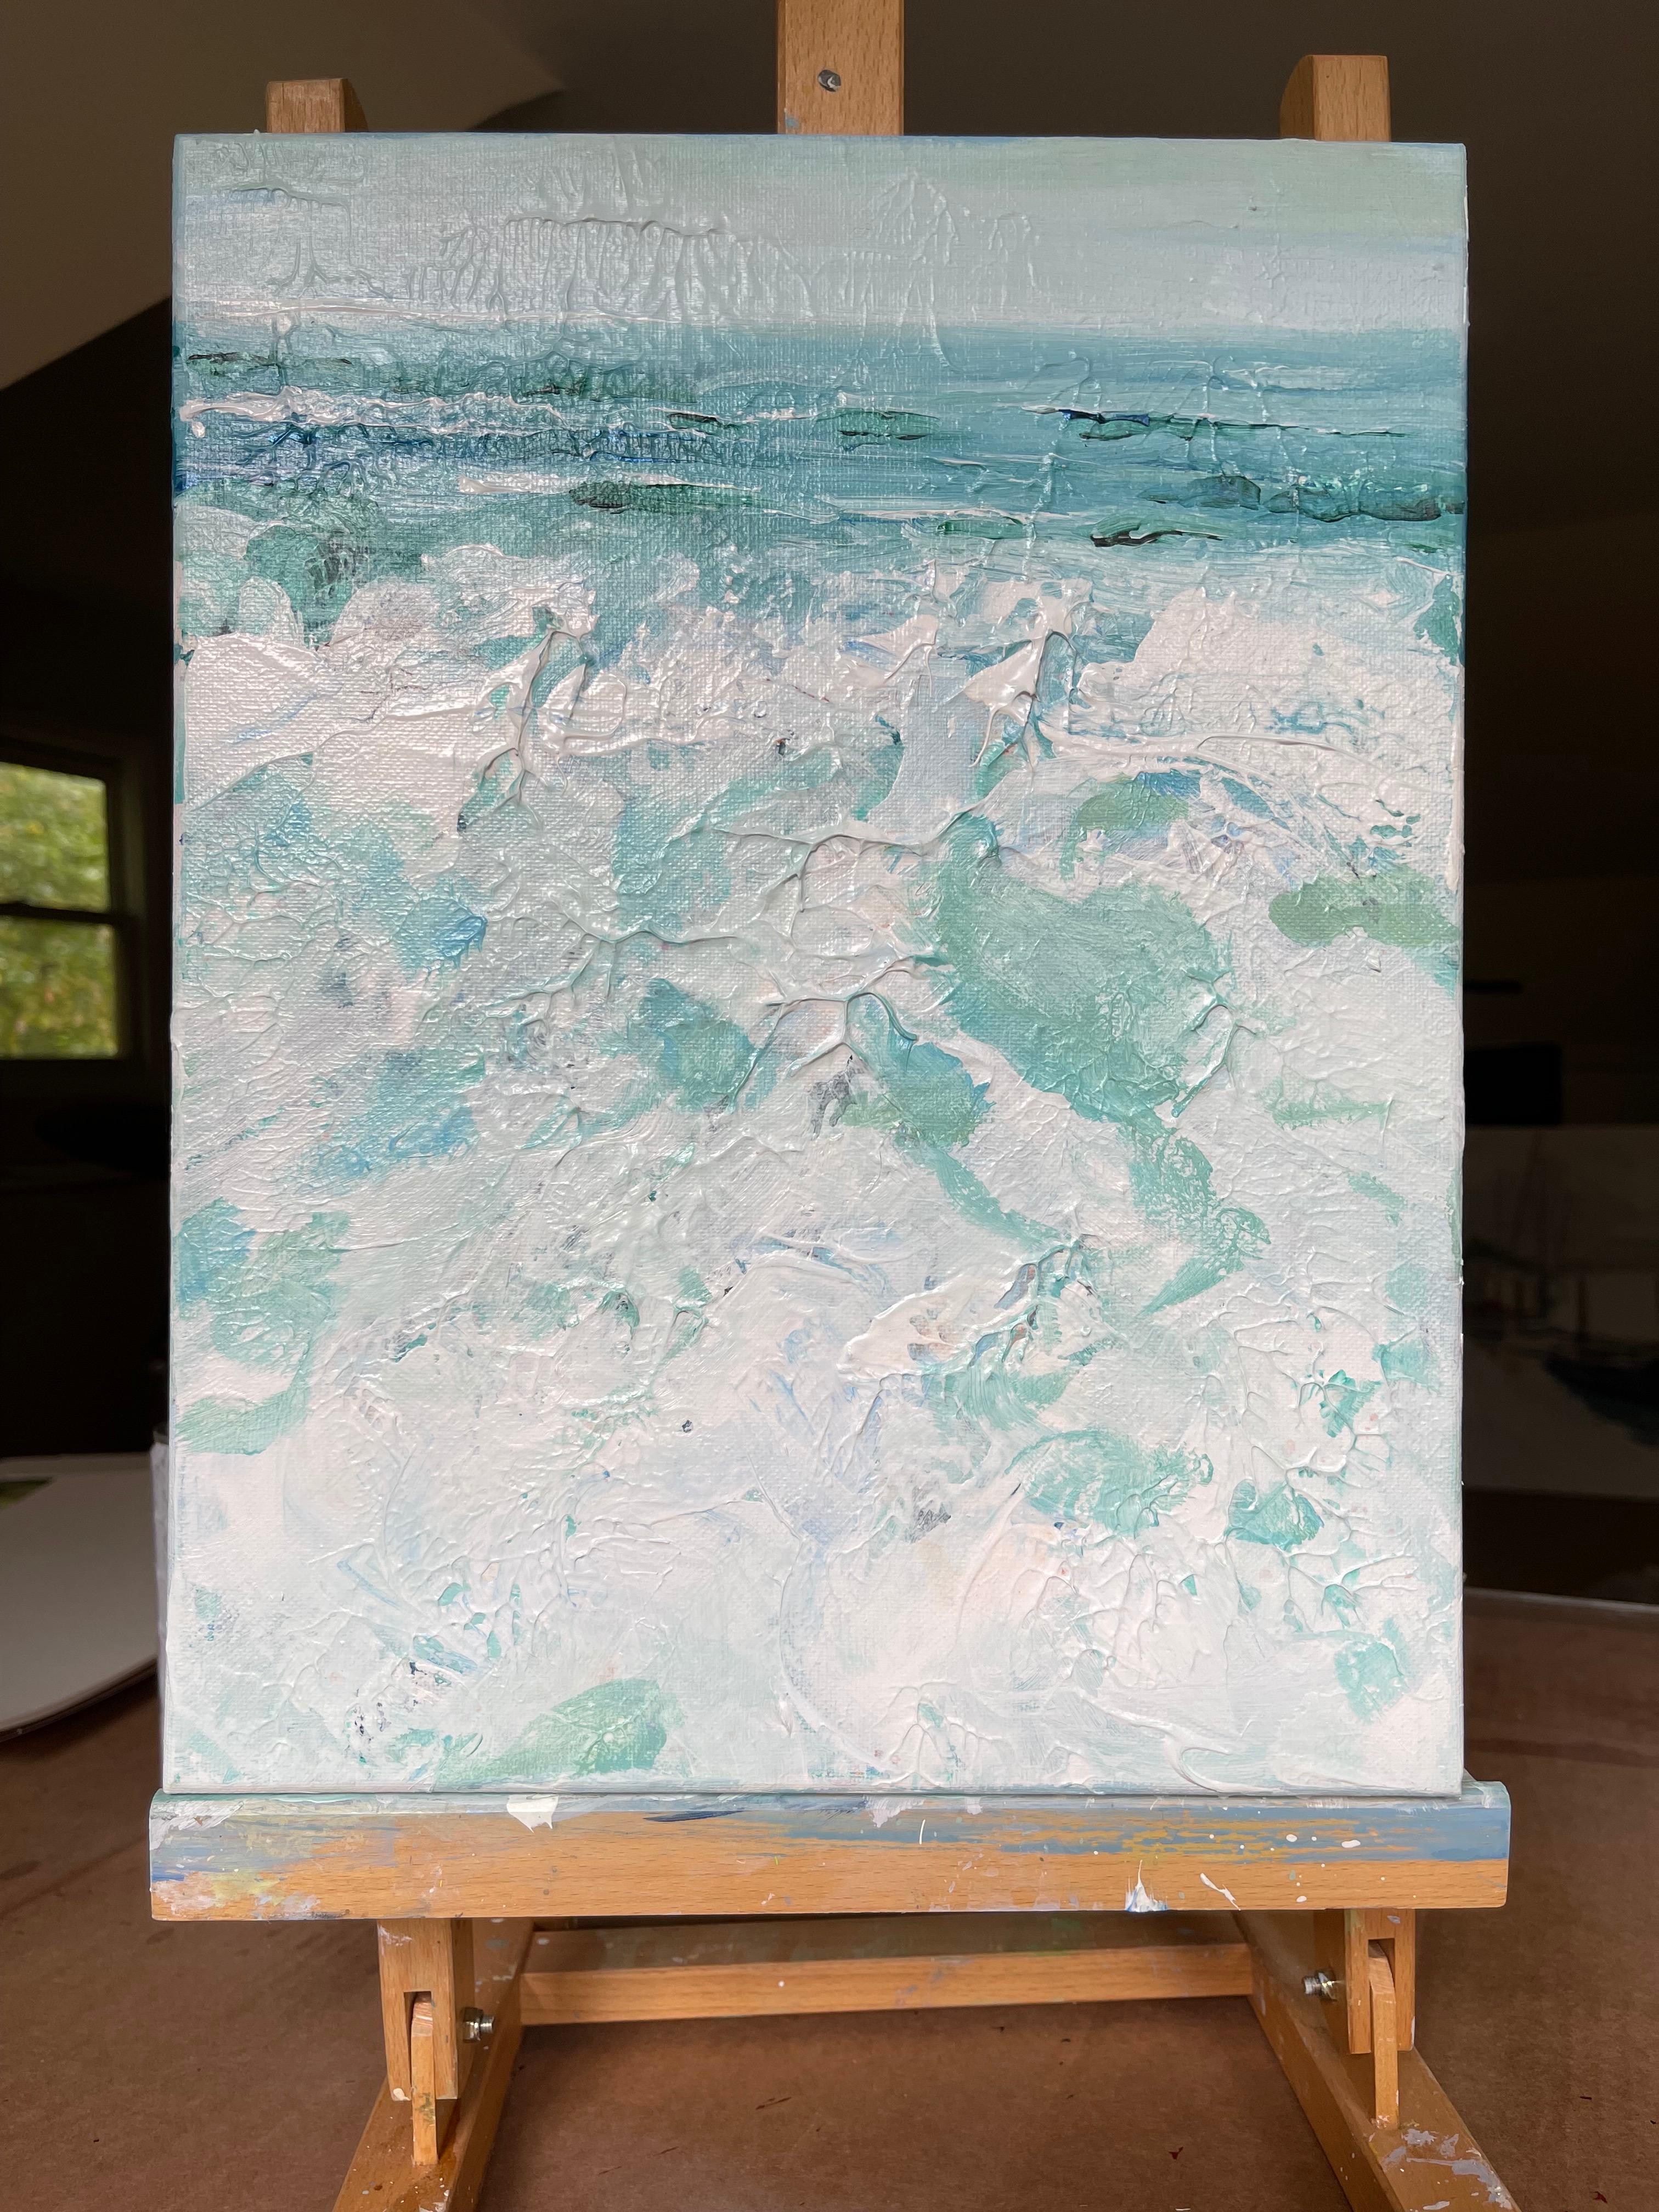 <p>Artist Comments<br>A textured abstract seascape by artist Patricia Fabian captures frothy white foam churning with powerful waves. Towards the distance, a whisper of the horizon gently blends with the soft clouds. Patricia shares this poem that